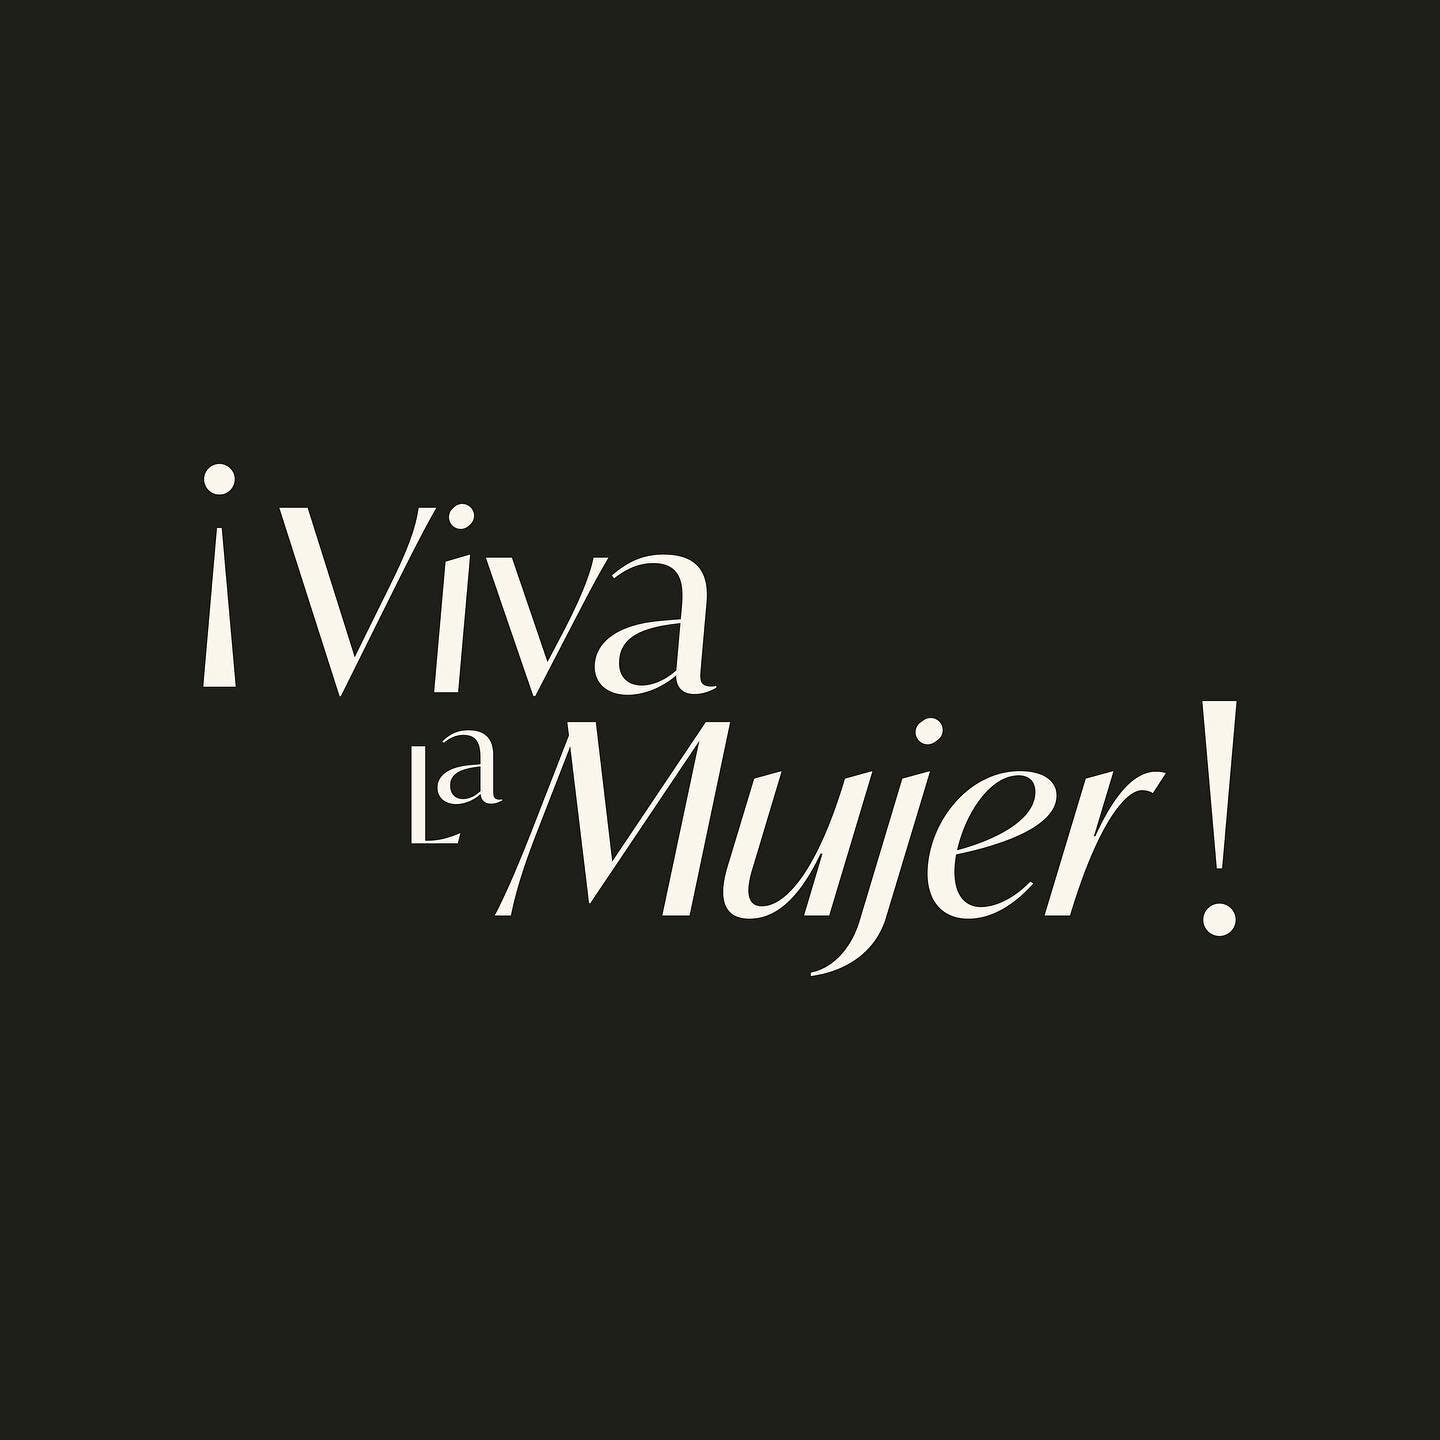 🥂 Happy International Women&rsquo;s Day! 

✨ Let today be a reminder of all the achievements mujeres across the world have made and all the achievements we have yet to make. 

Viva la mujer who is changing everything! 🙌 

.
.
.
.
.
.
.
.
.
#vivalam